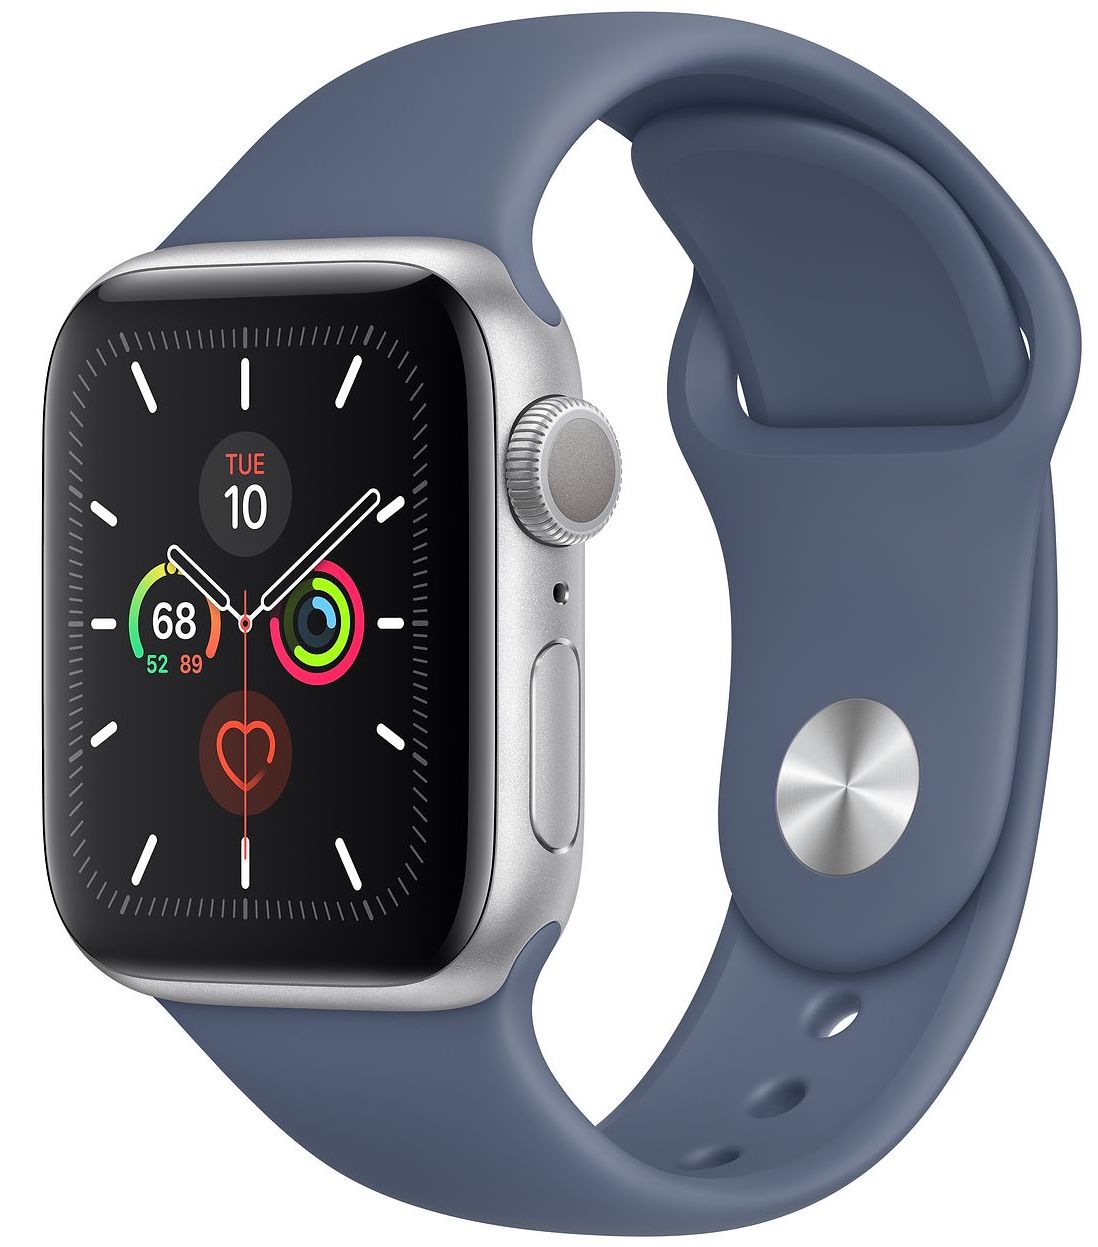 what is the difference between an apple watch with cellular and without